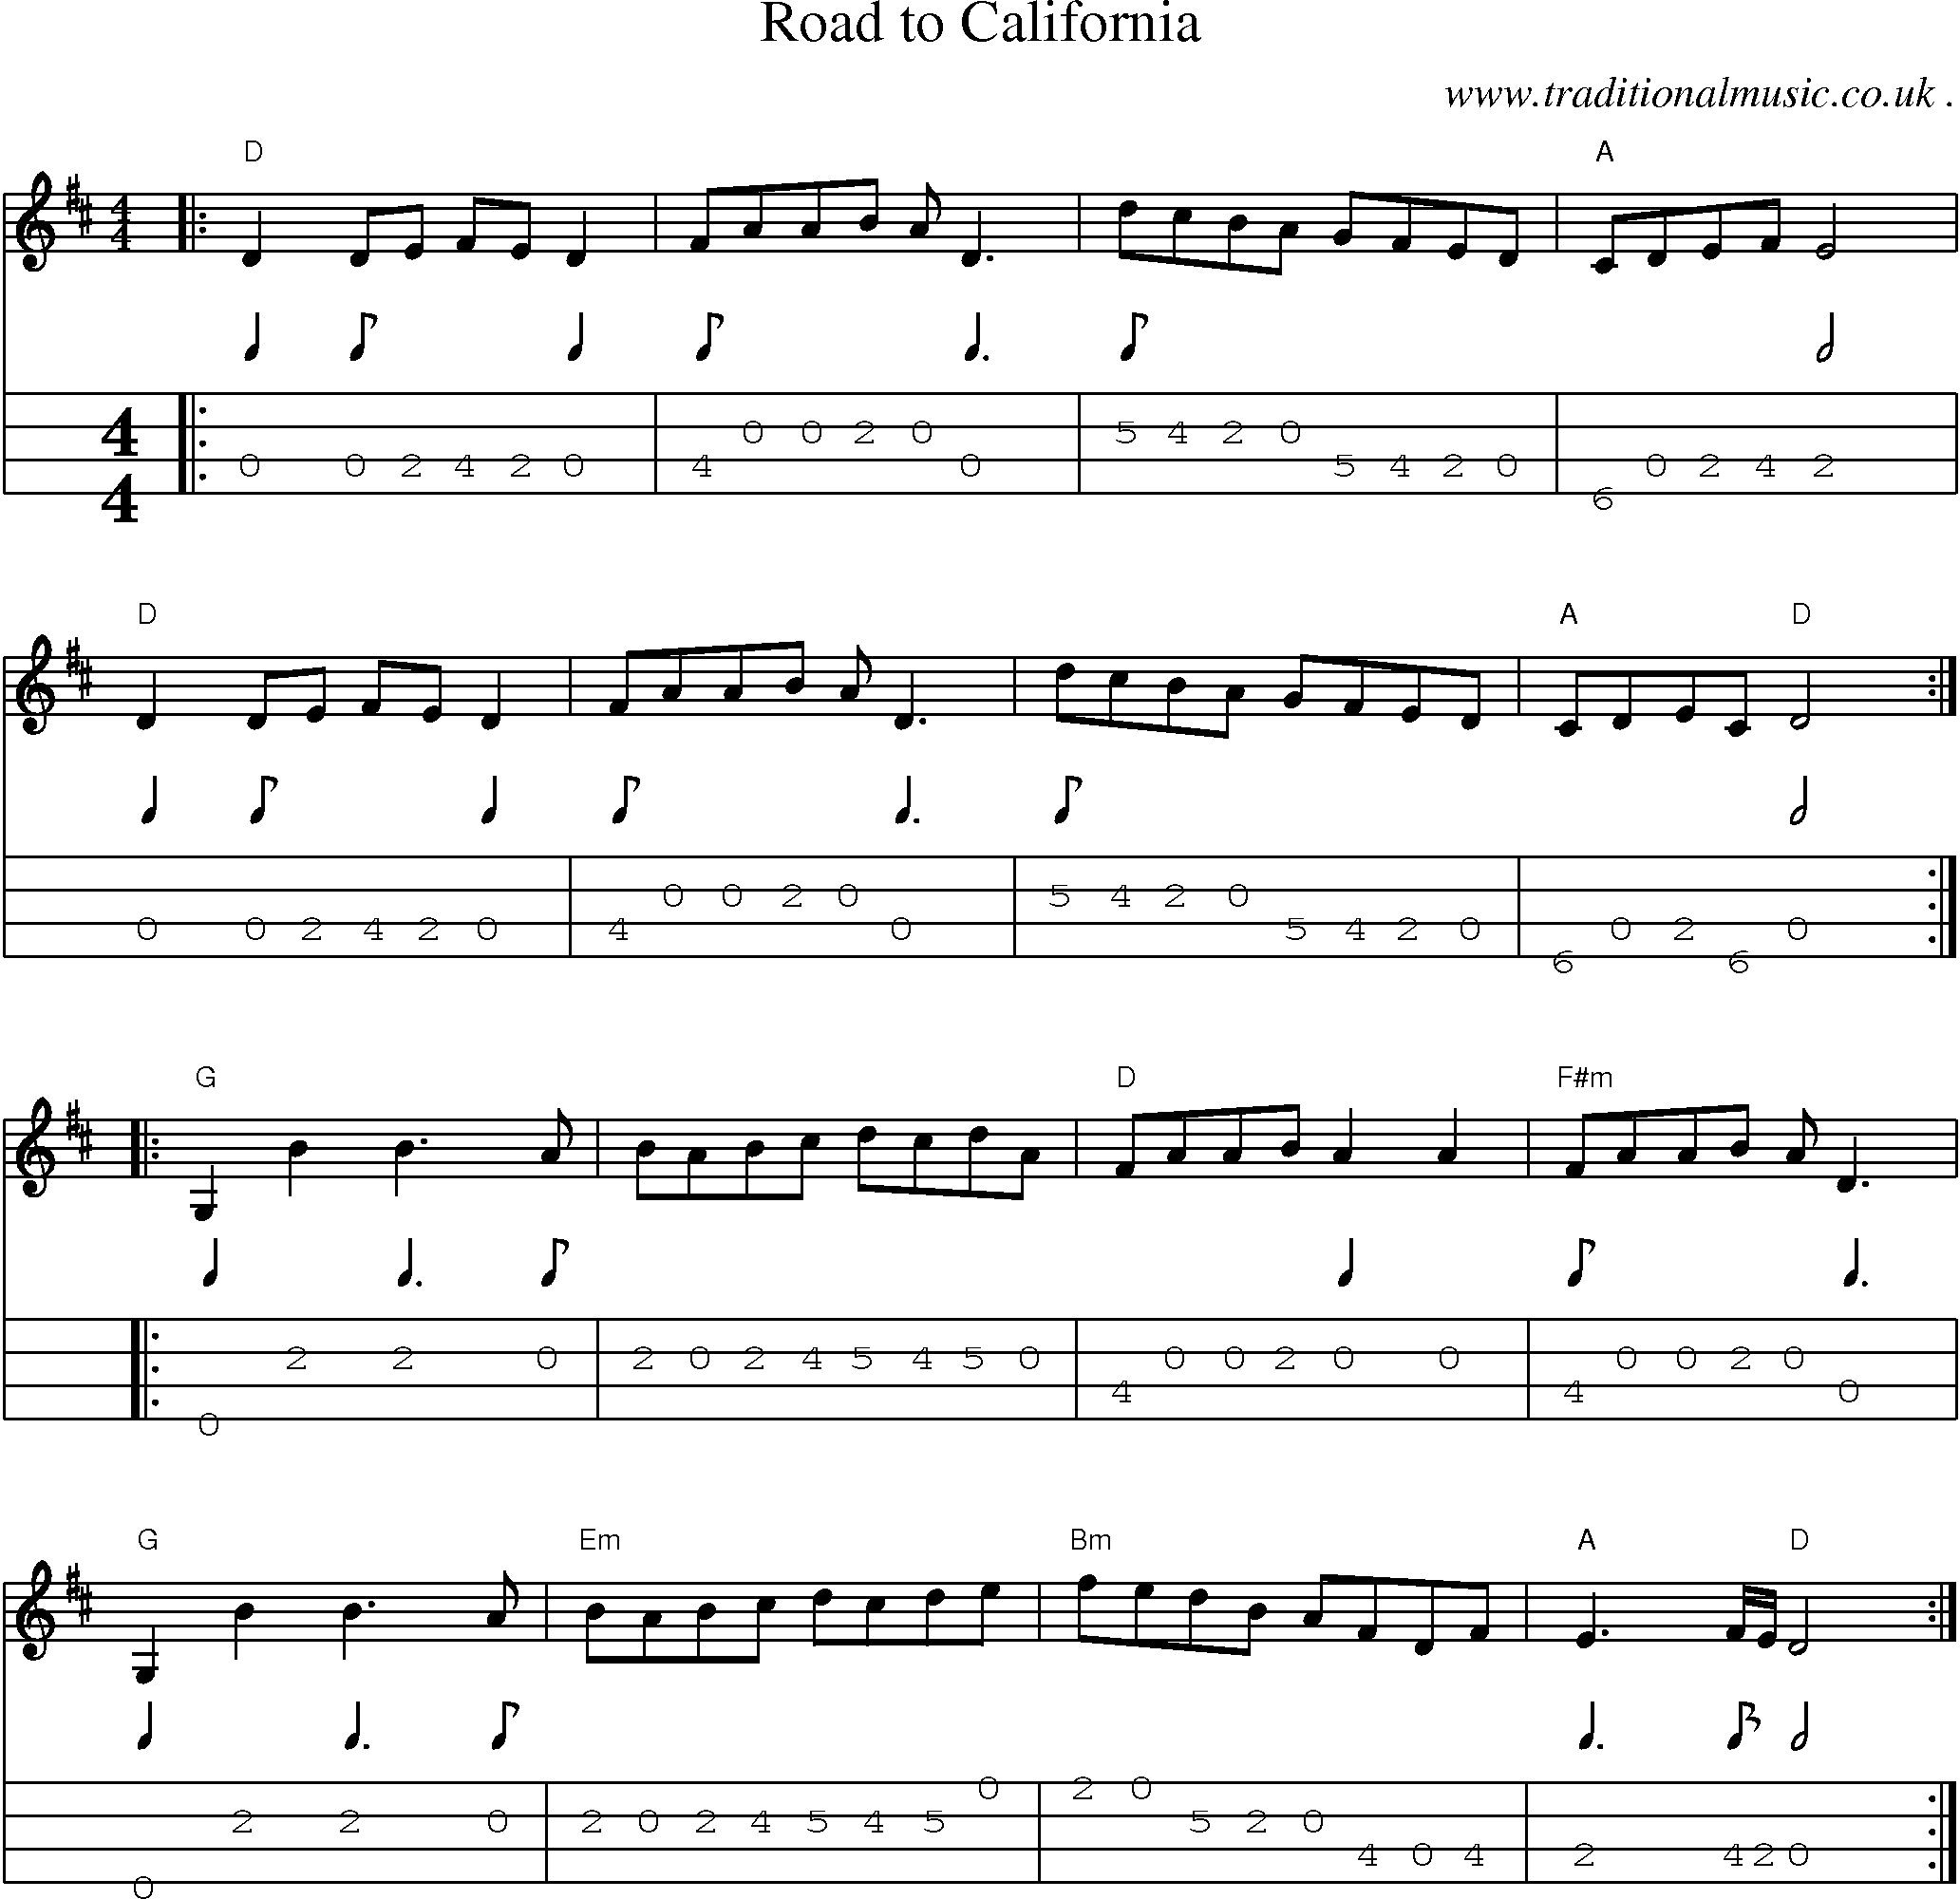 American Old Time Music Scores And Tabs For Mandolin Road To